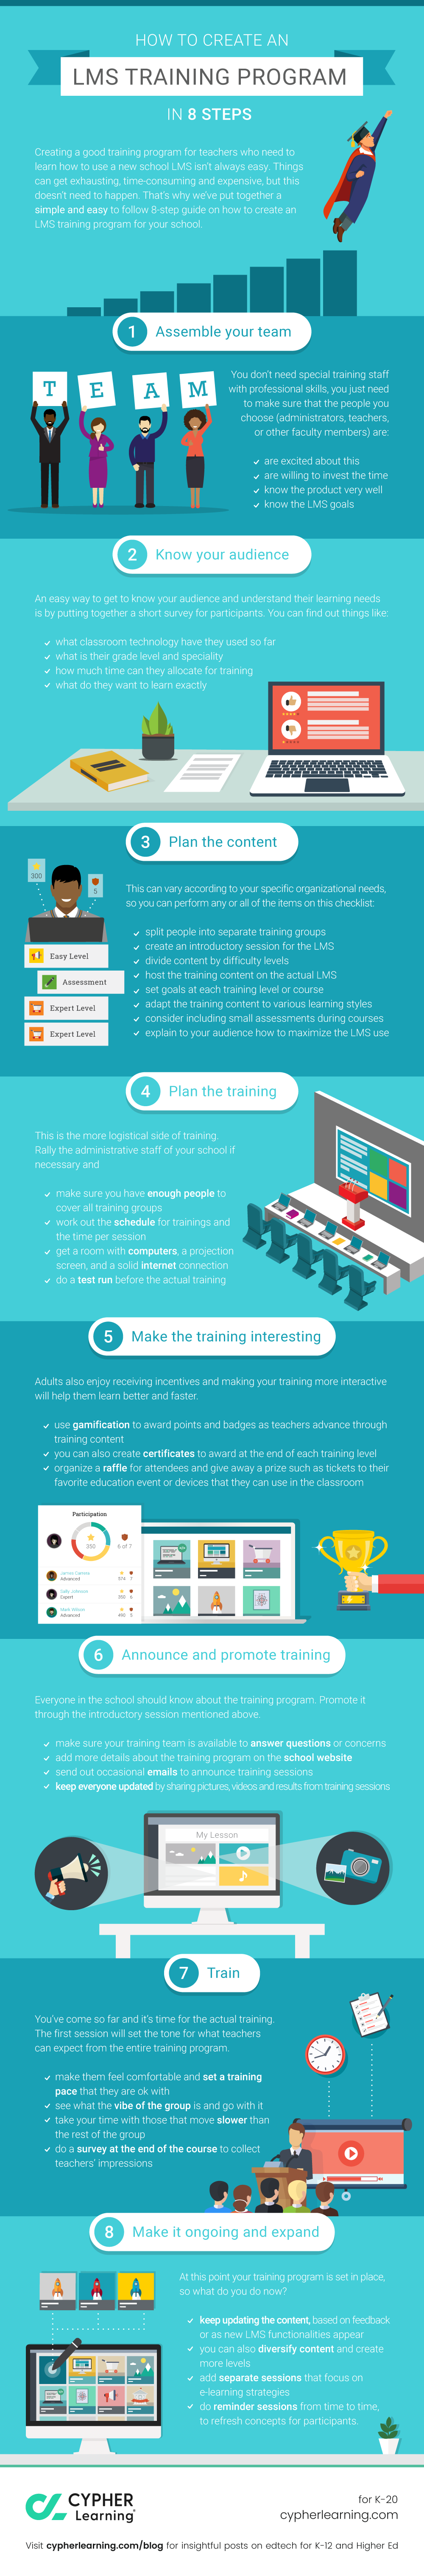 How to create an LMS training program in 8 steps